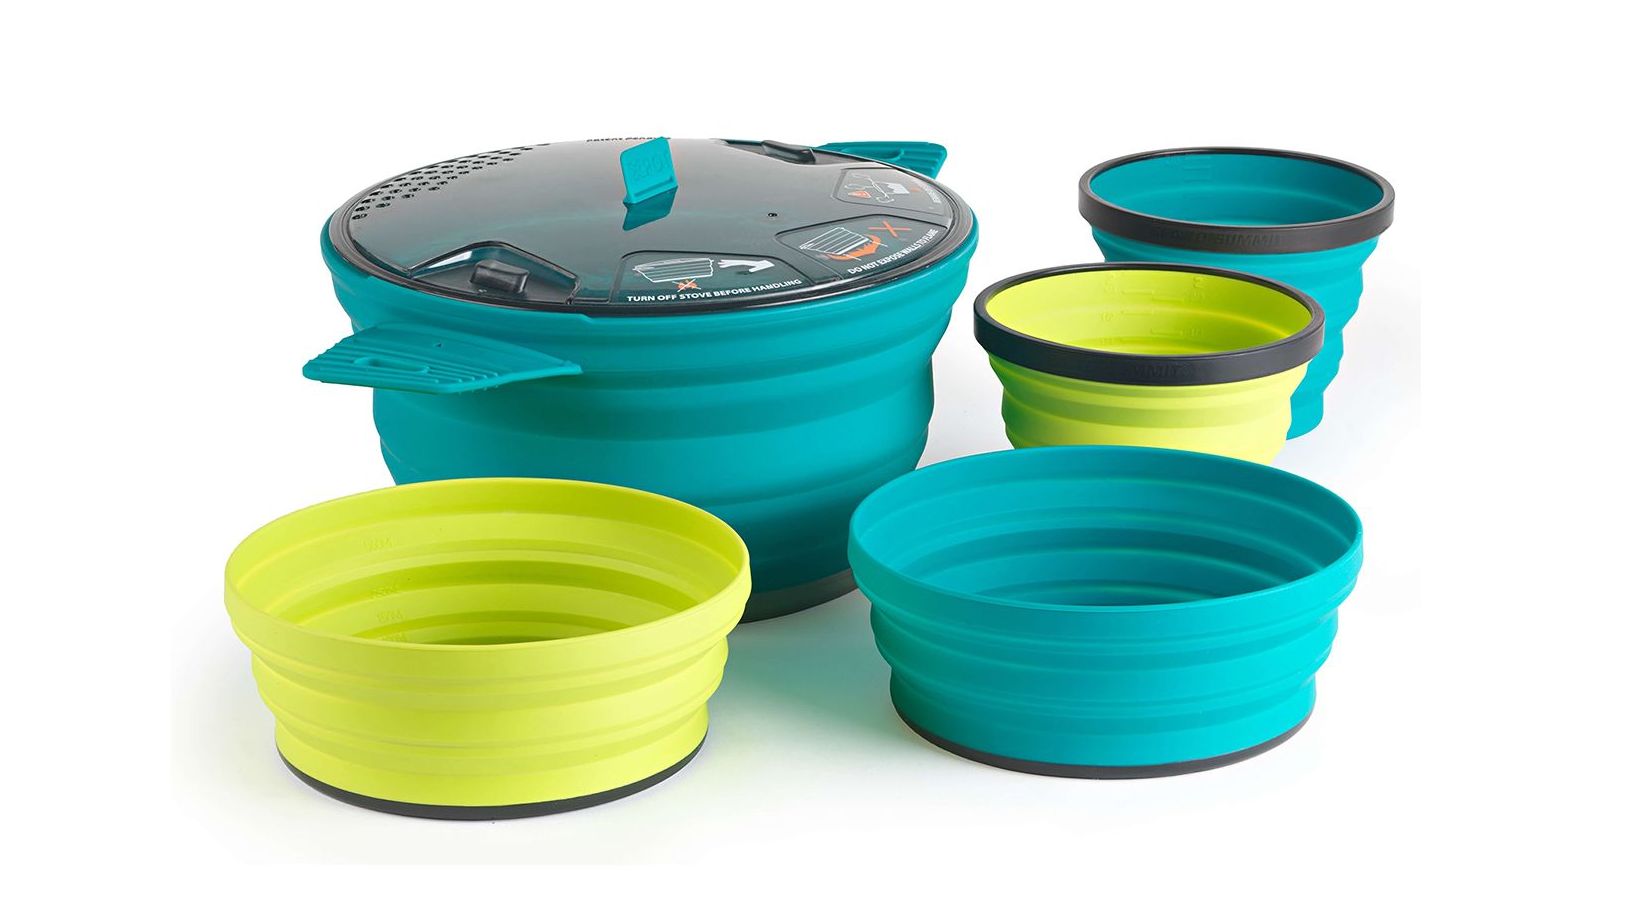 Collapsible Cookware & Dinnerware